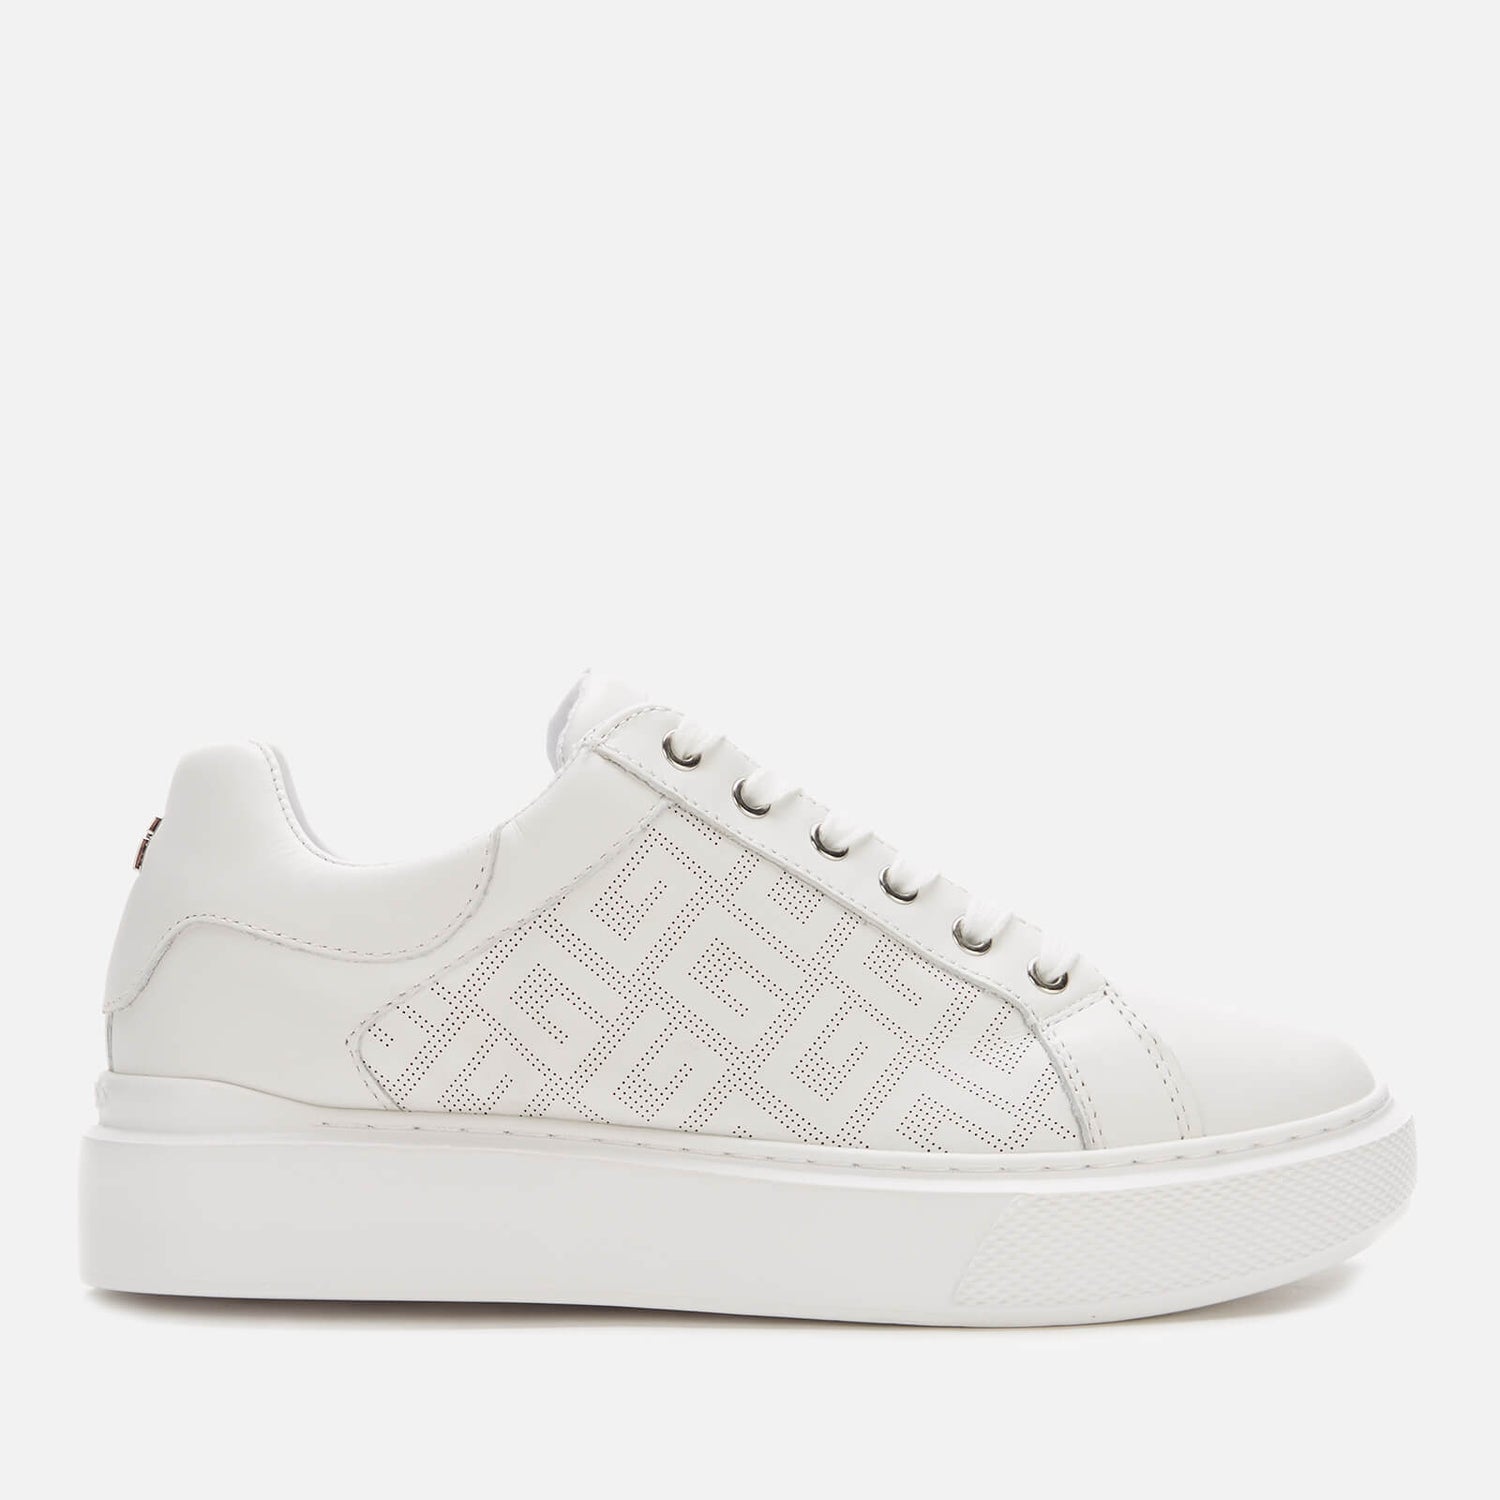 Guess Women's Ivee Leather Flatform Trainers - White - UK 3